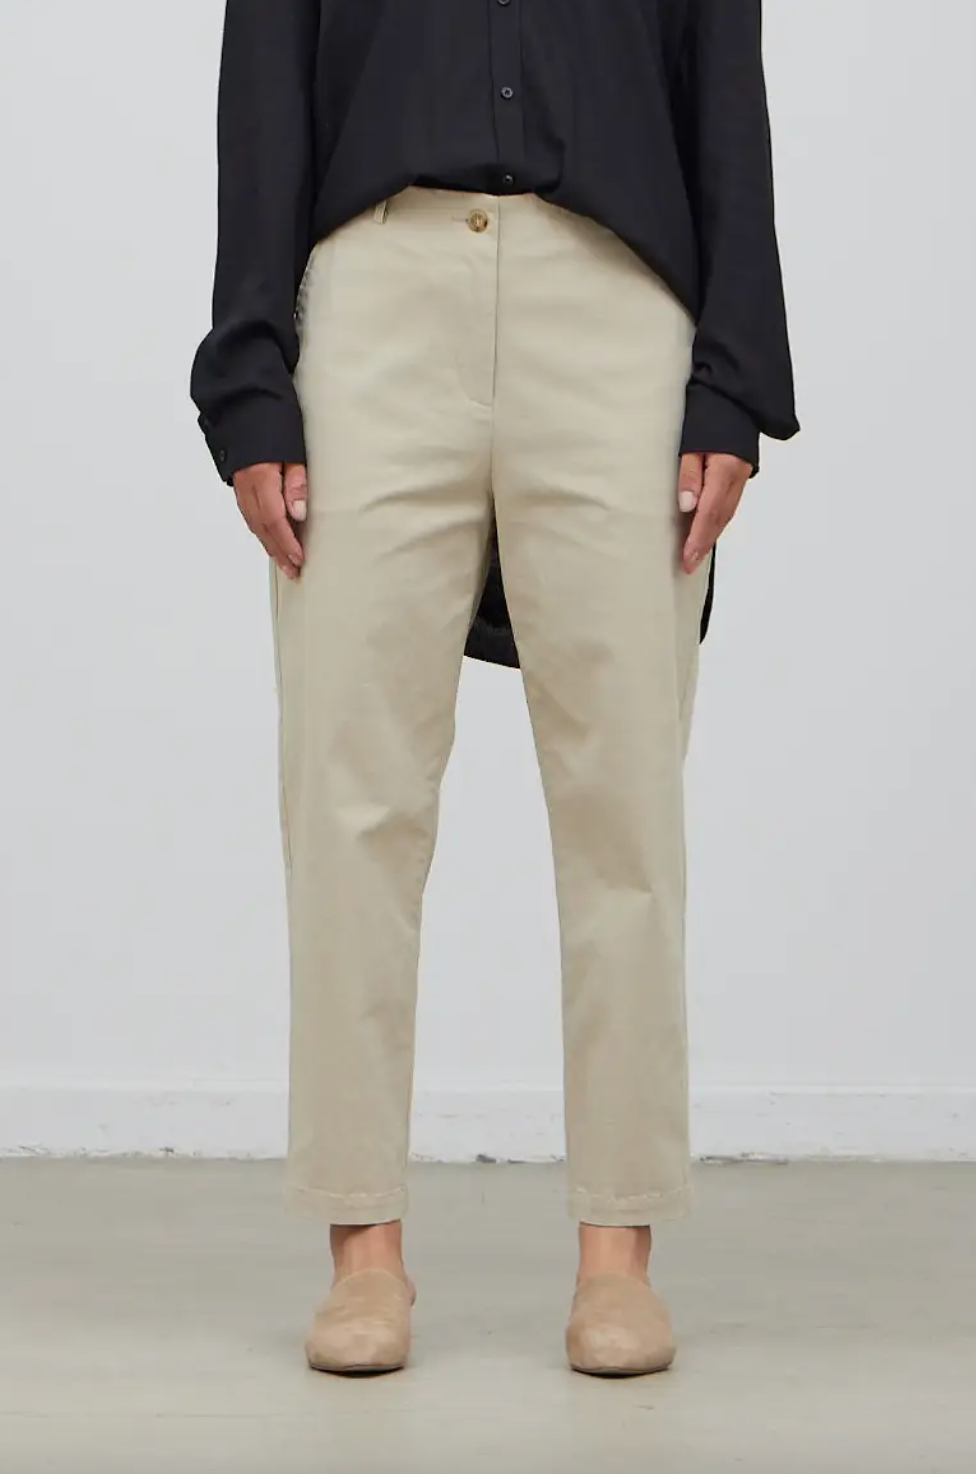 On The Move Tapered Pant Pants in Papyrus at Wrapsody